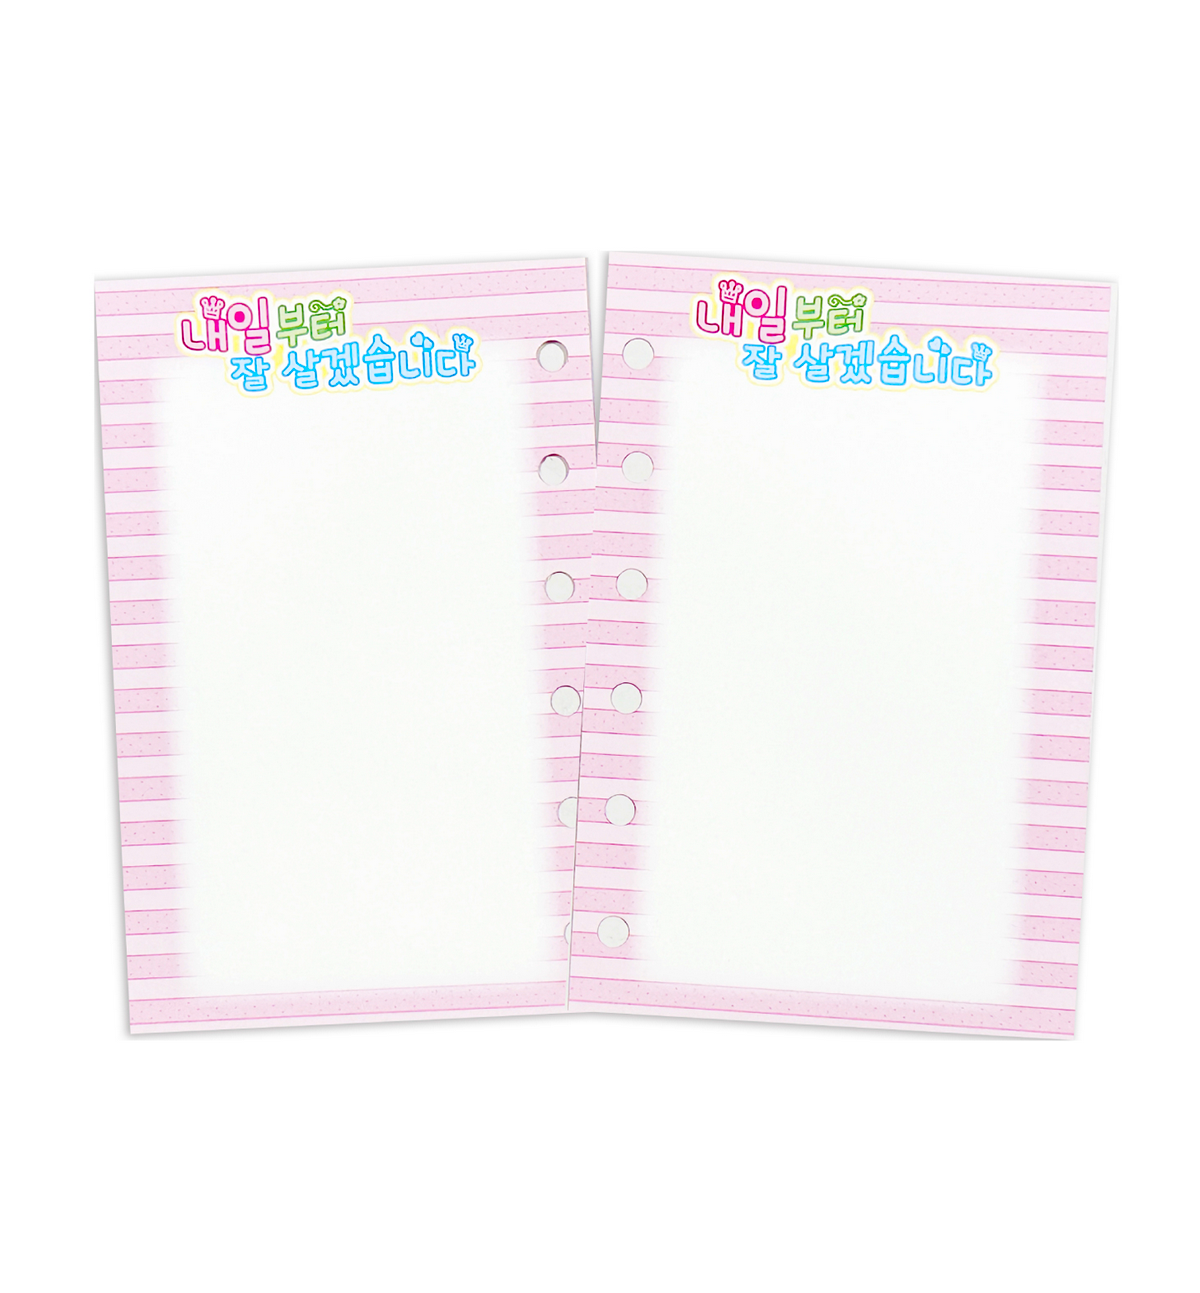 A7 I'll Live Well Paper Refill [Pink]